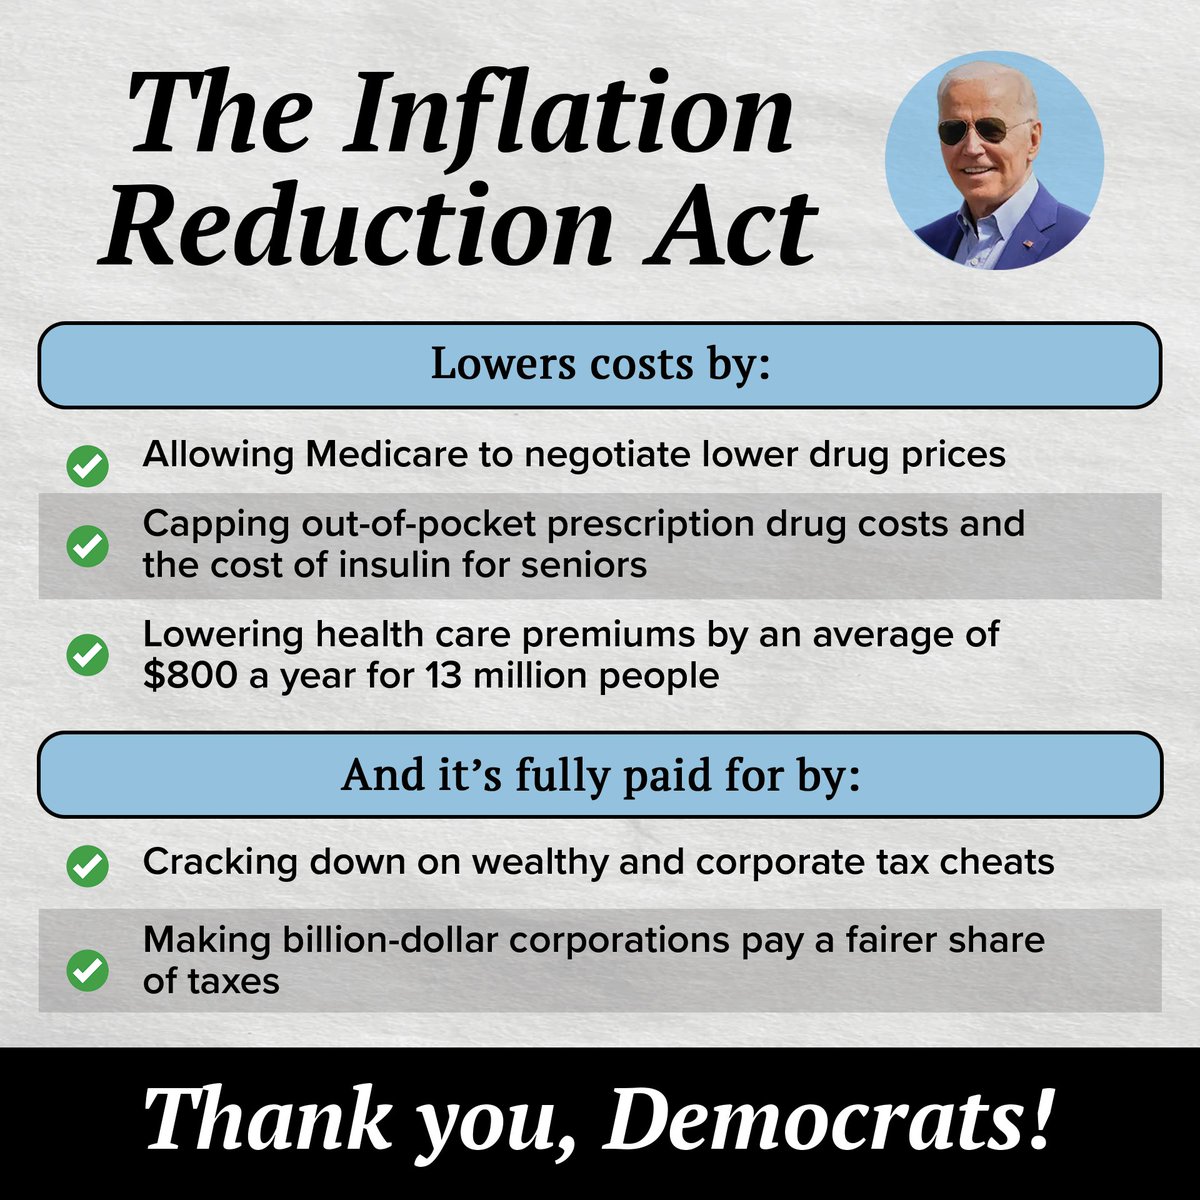 The #InflationReductionAct helps catch wealthy & corporate tax cheaters who avoid paying what they owe in taxes while: ☑️ Lowering healthcare premiums by an average $800/yr for 13 million folks ☑️ Capping out-of-pocket Rx costs for seniors ☑️ Lowering Medicare Rx prices